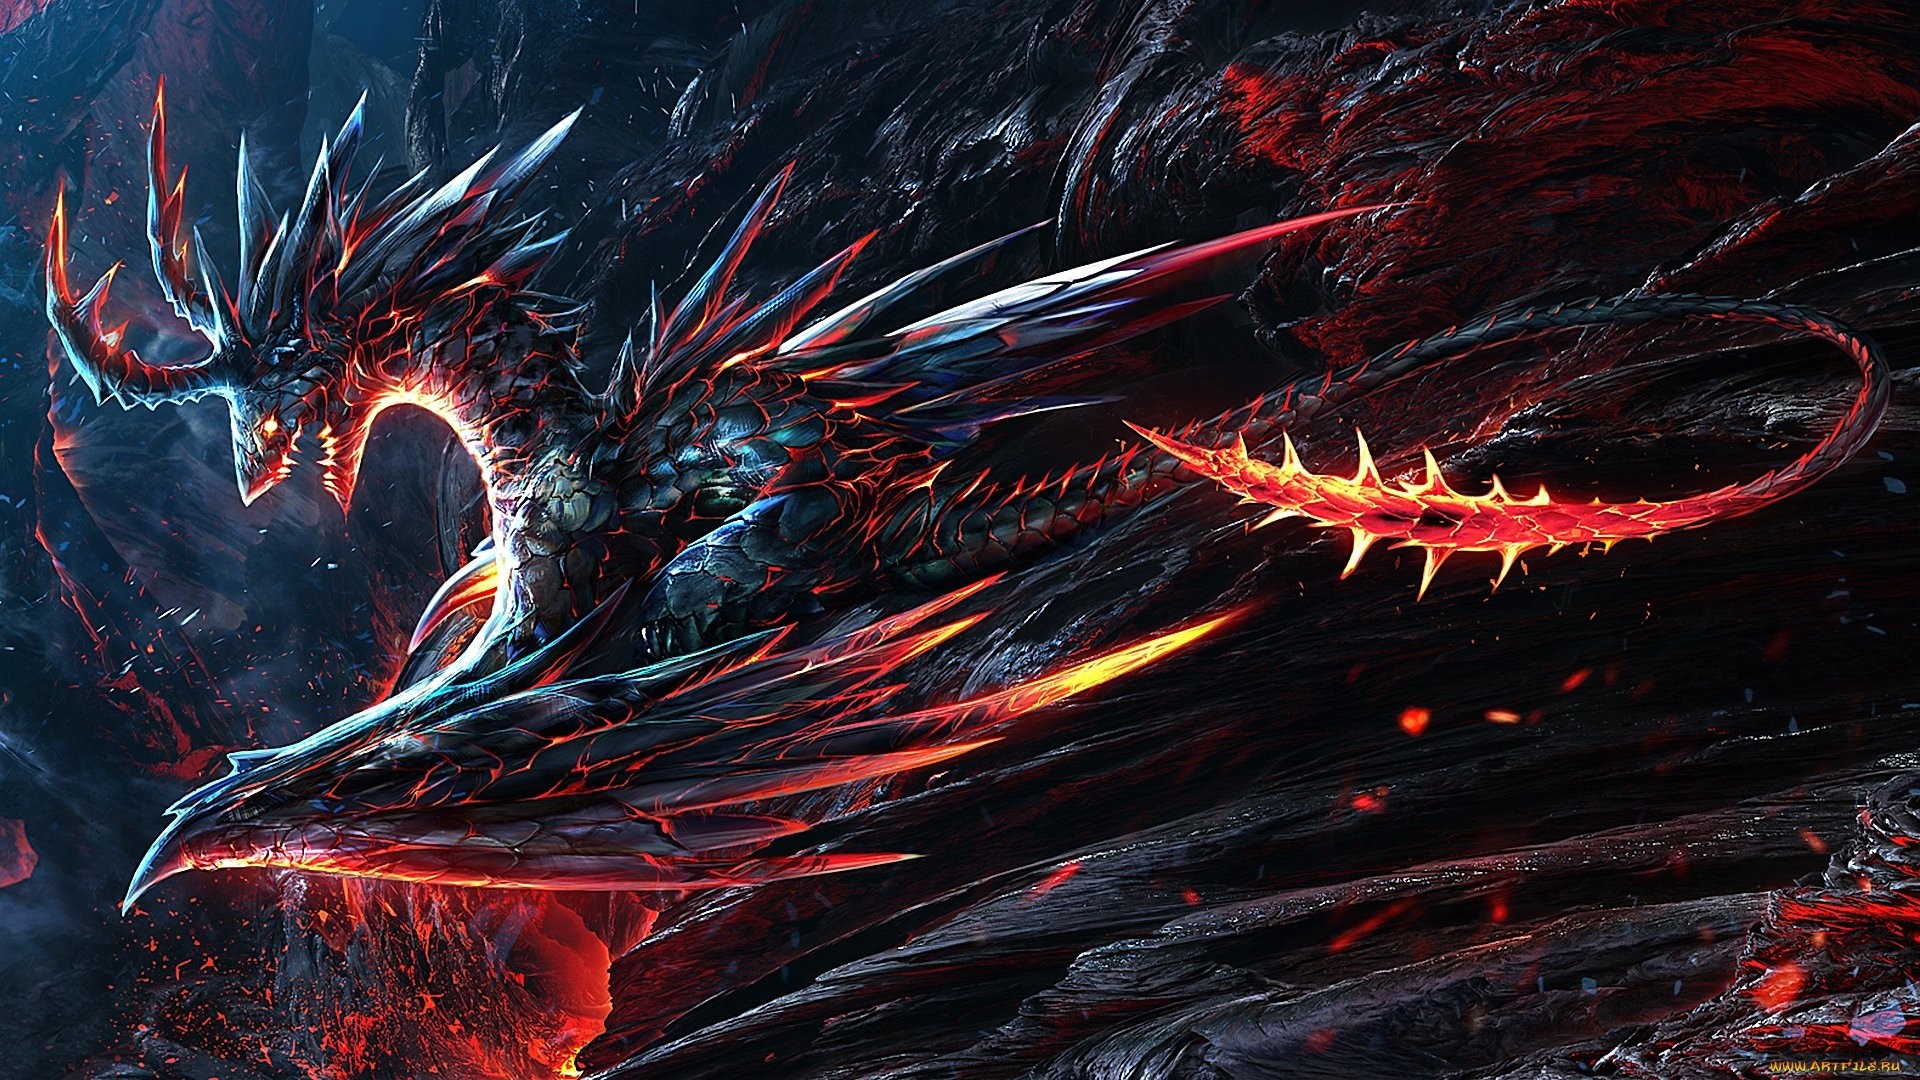 1920x1080 Lava Dragon Wallpapers | Lava Dragon Wallpapers | Pinterest | Lava and  Dragons